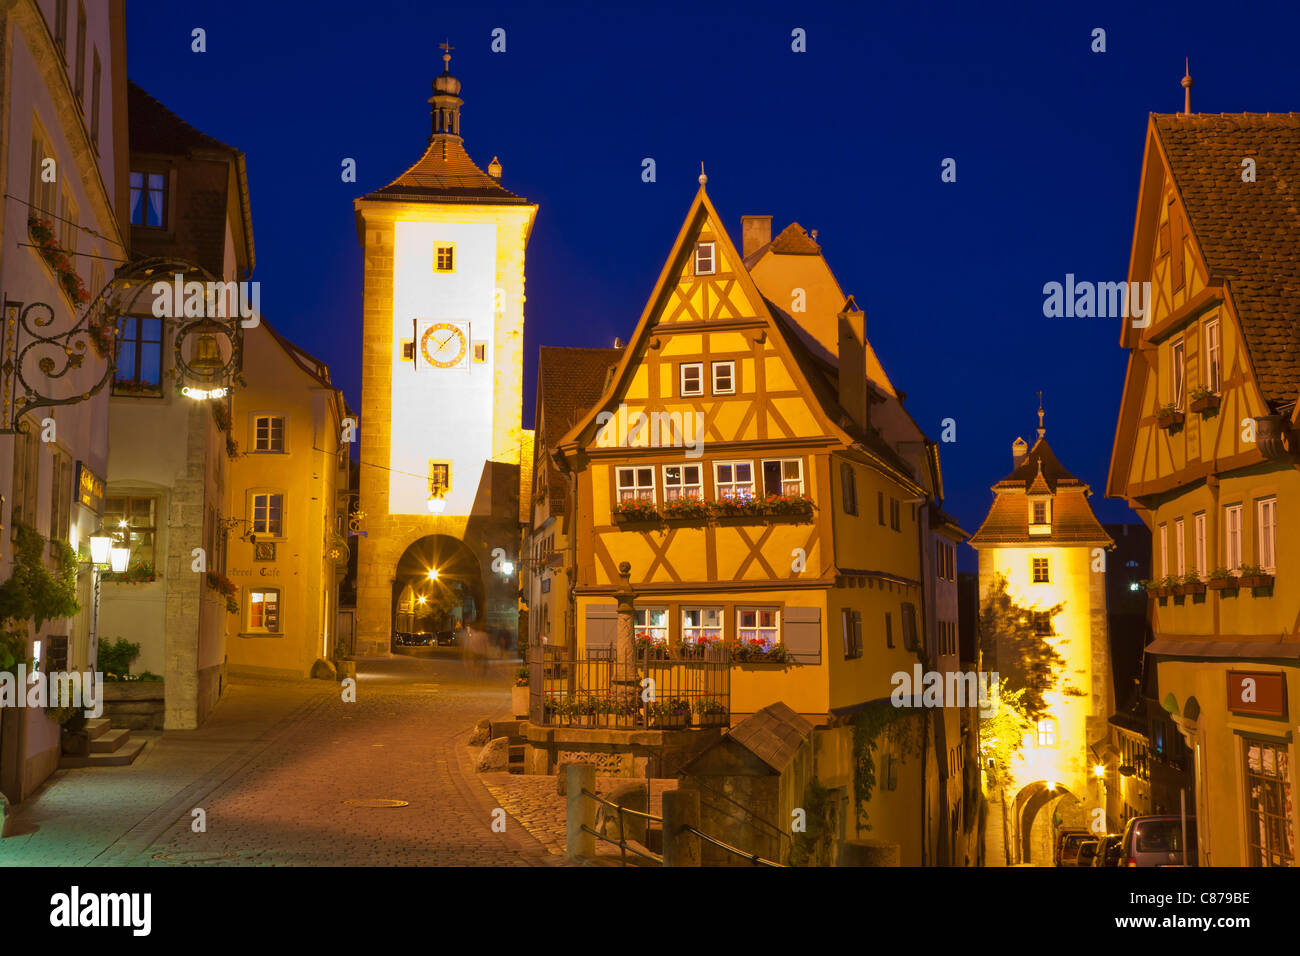 Germany, Bavaria, Franconia, Rothenburg ob der Tauber, View of frame houses and Siebersturm tower Stock Photo